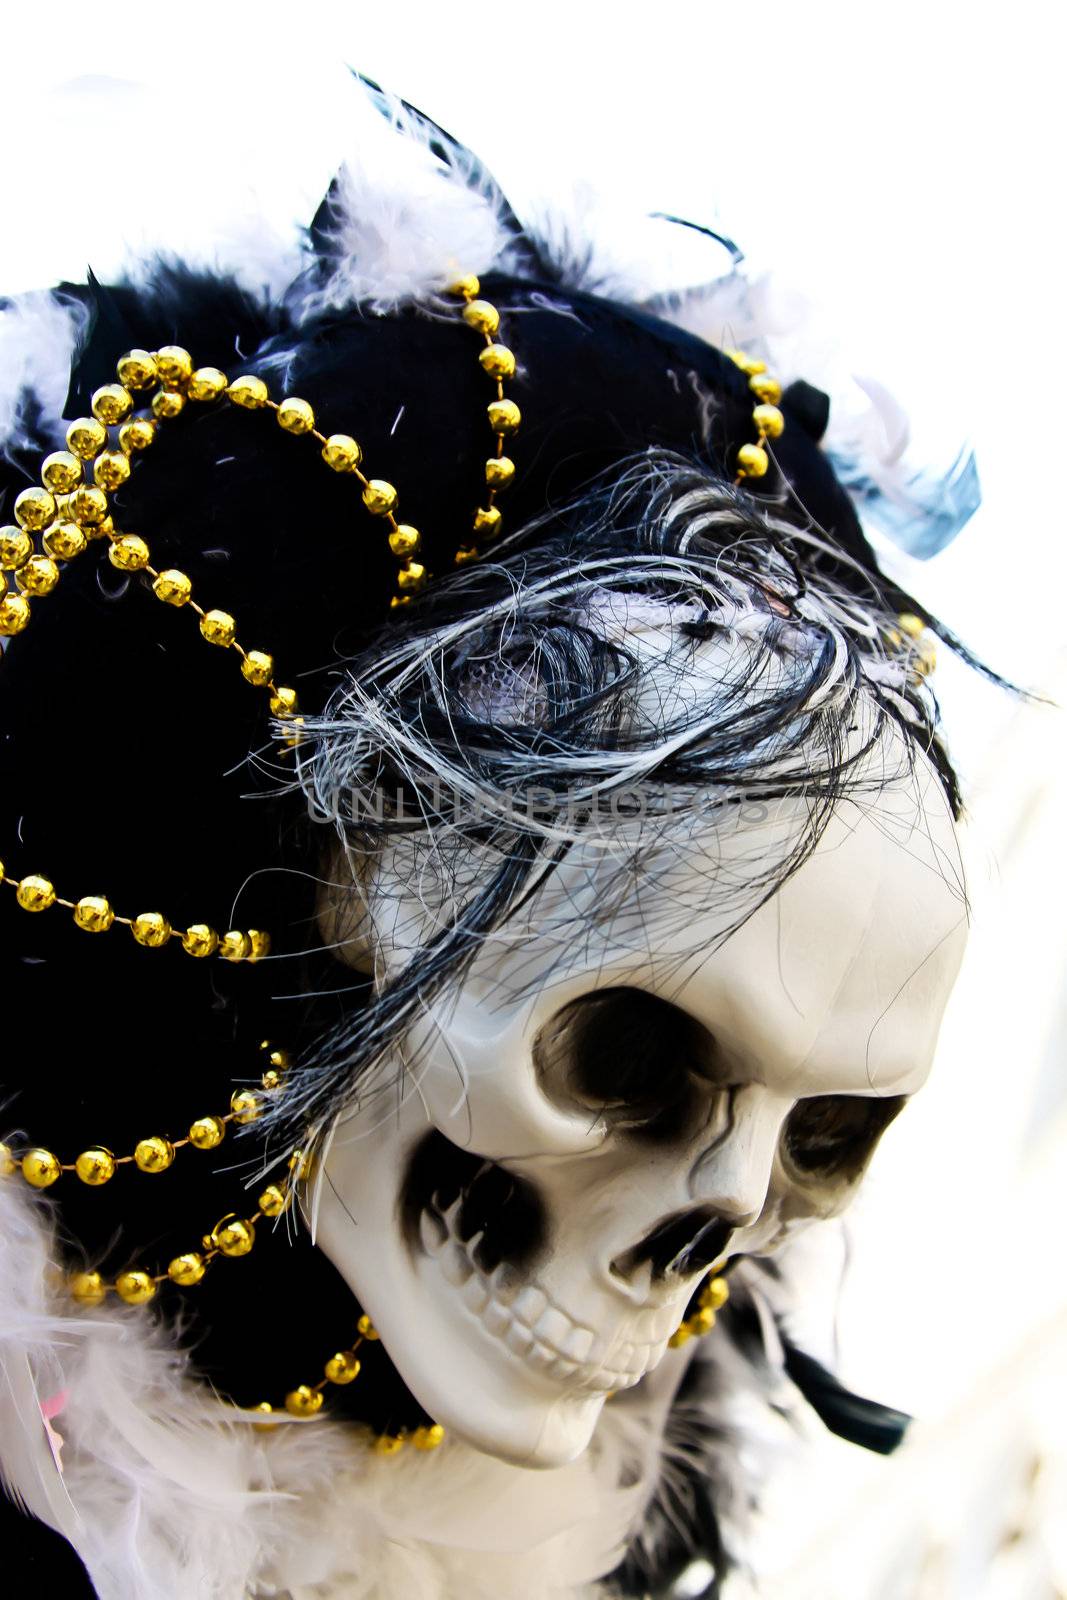 venice carnival present one skull on the hat